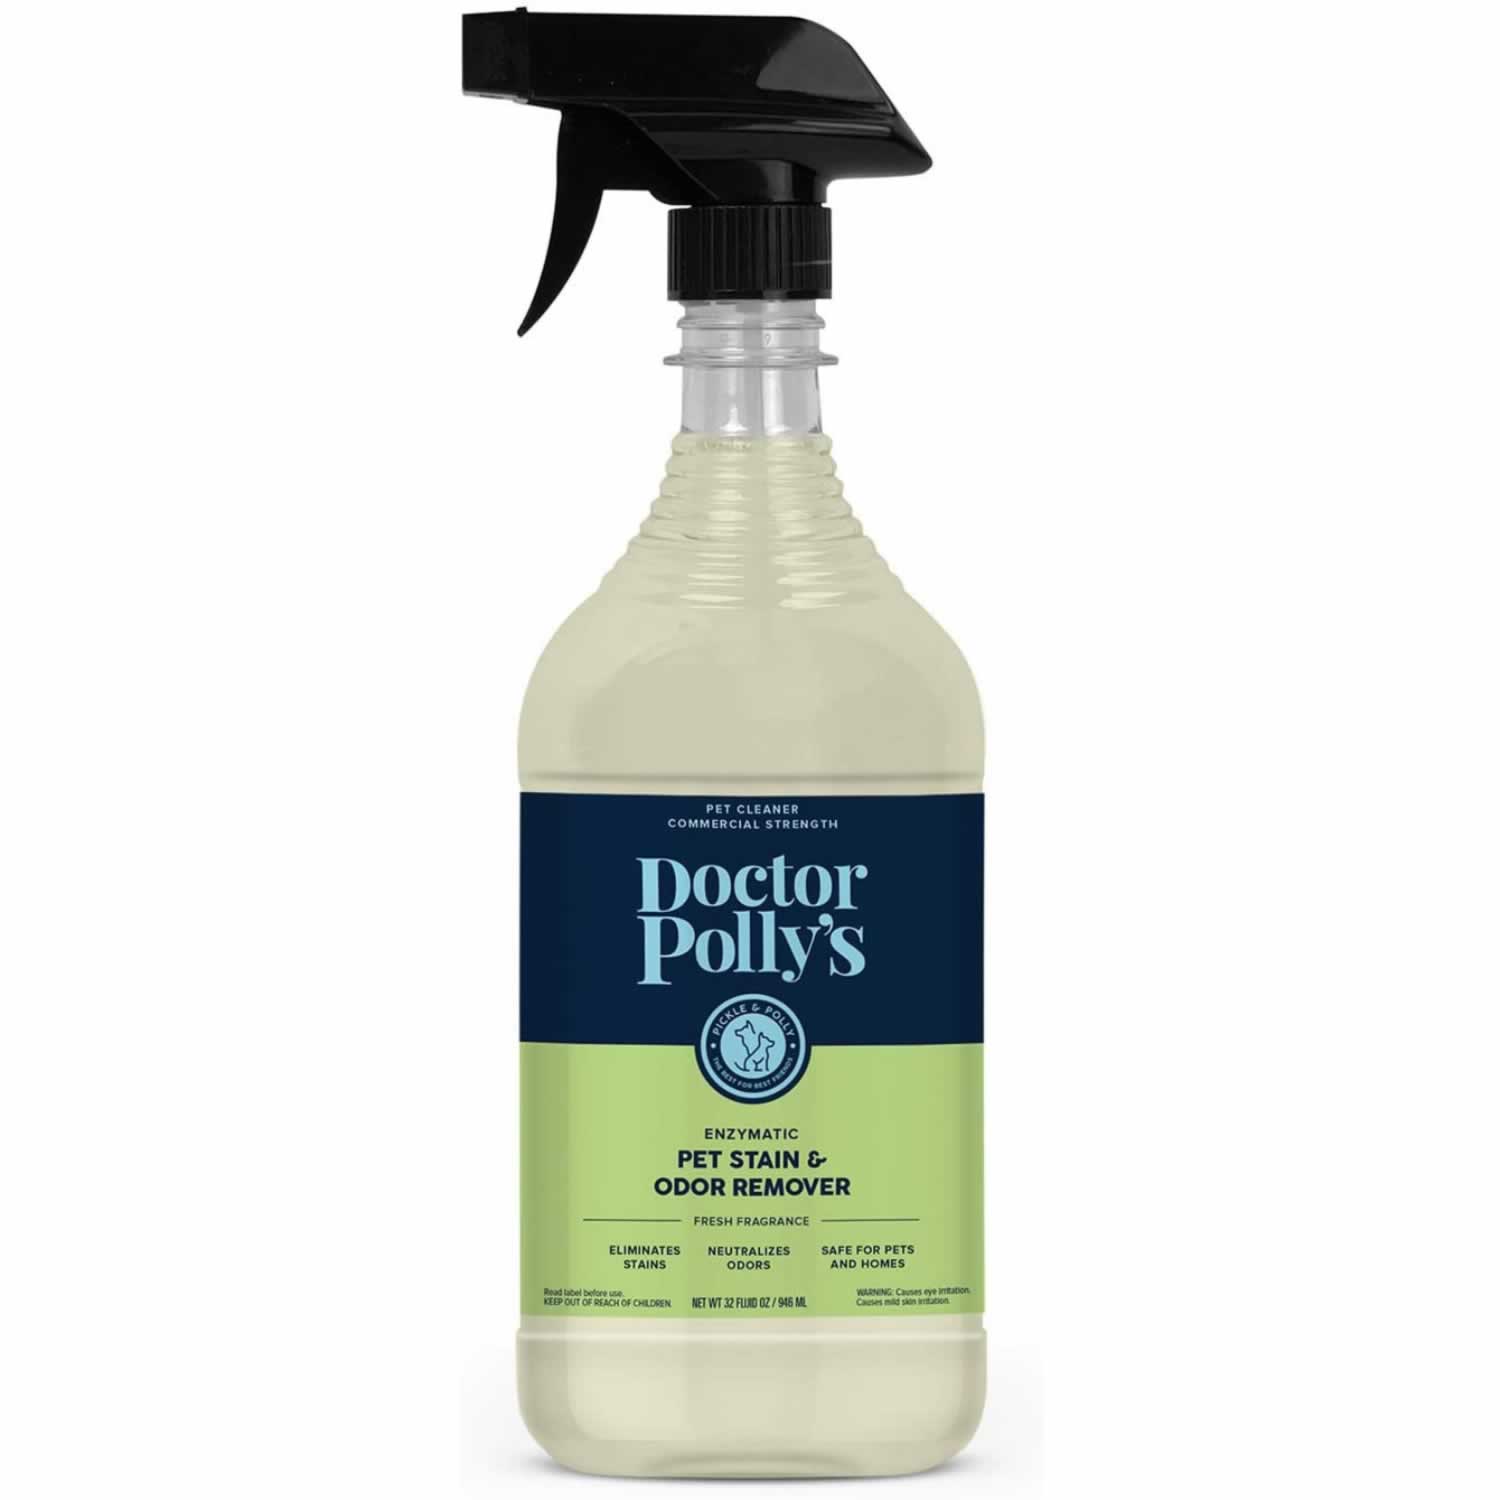 A bottle of Dr. Polly's Stain & Odor Remover (32oz).